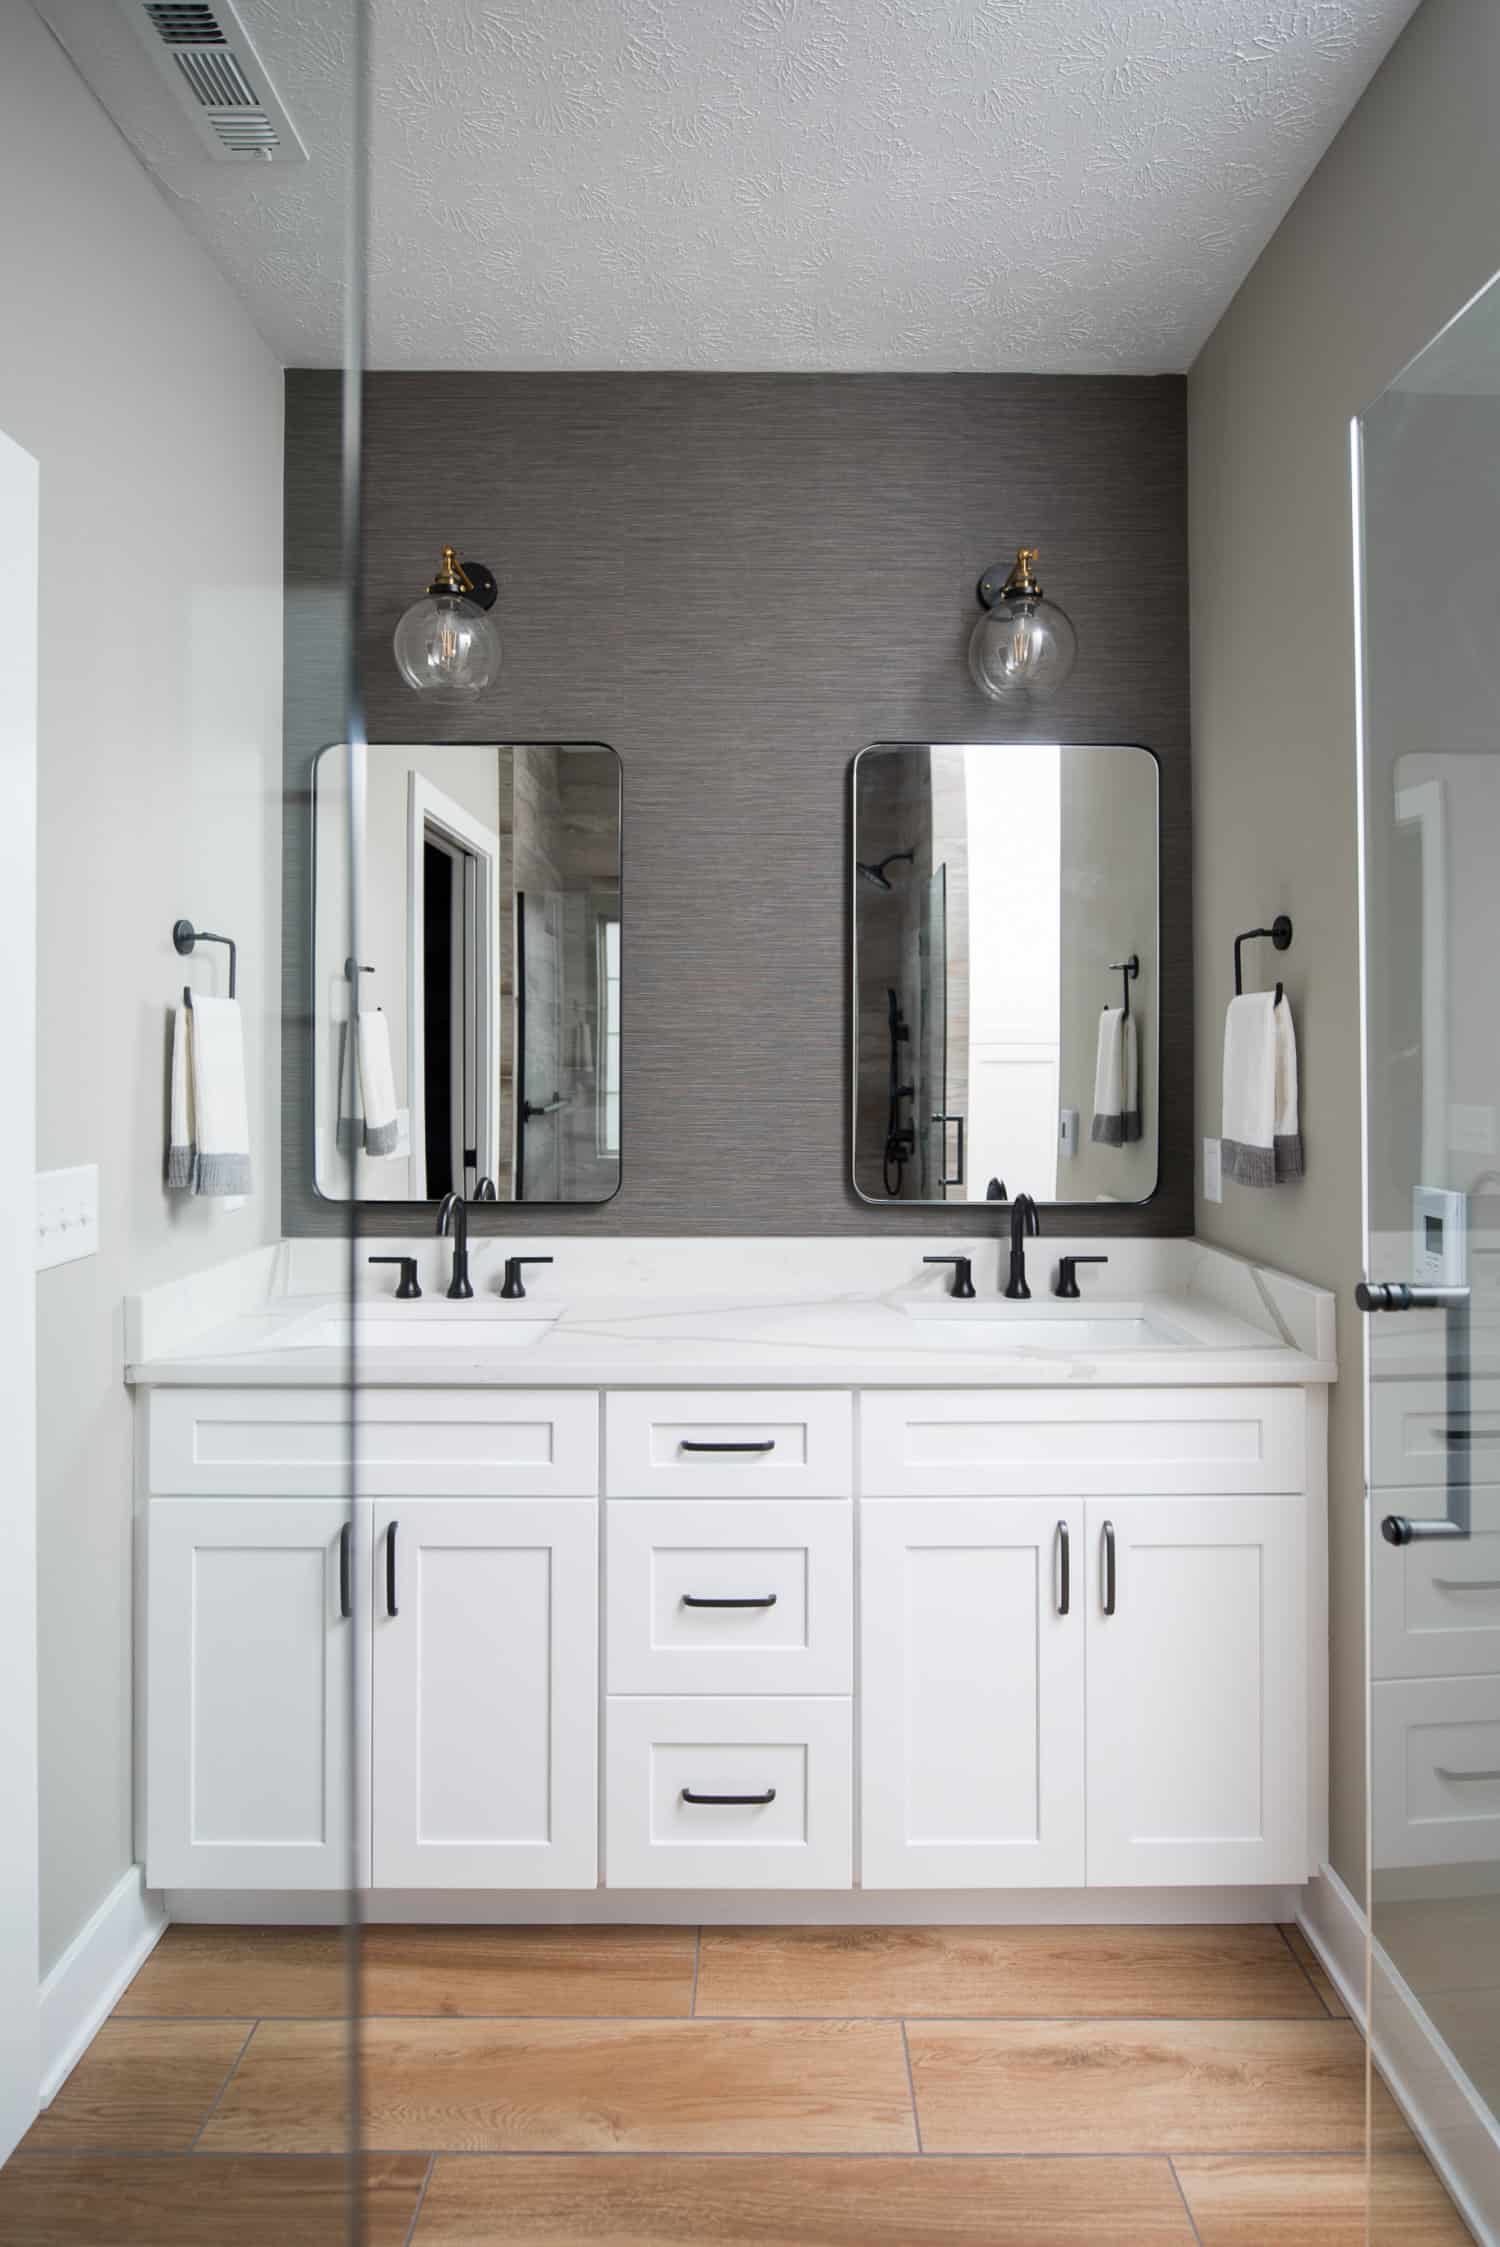 Nicholas Design Build | A modern white bathroom with two contemporary sinks and mirrors.